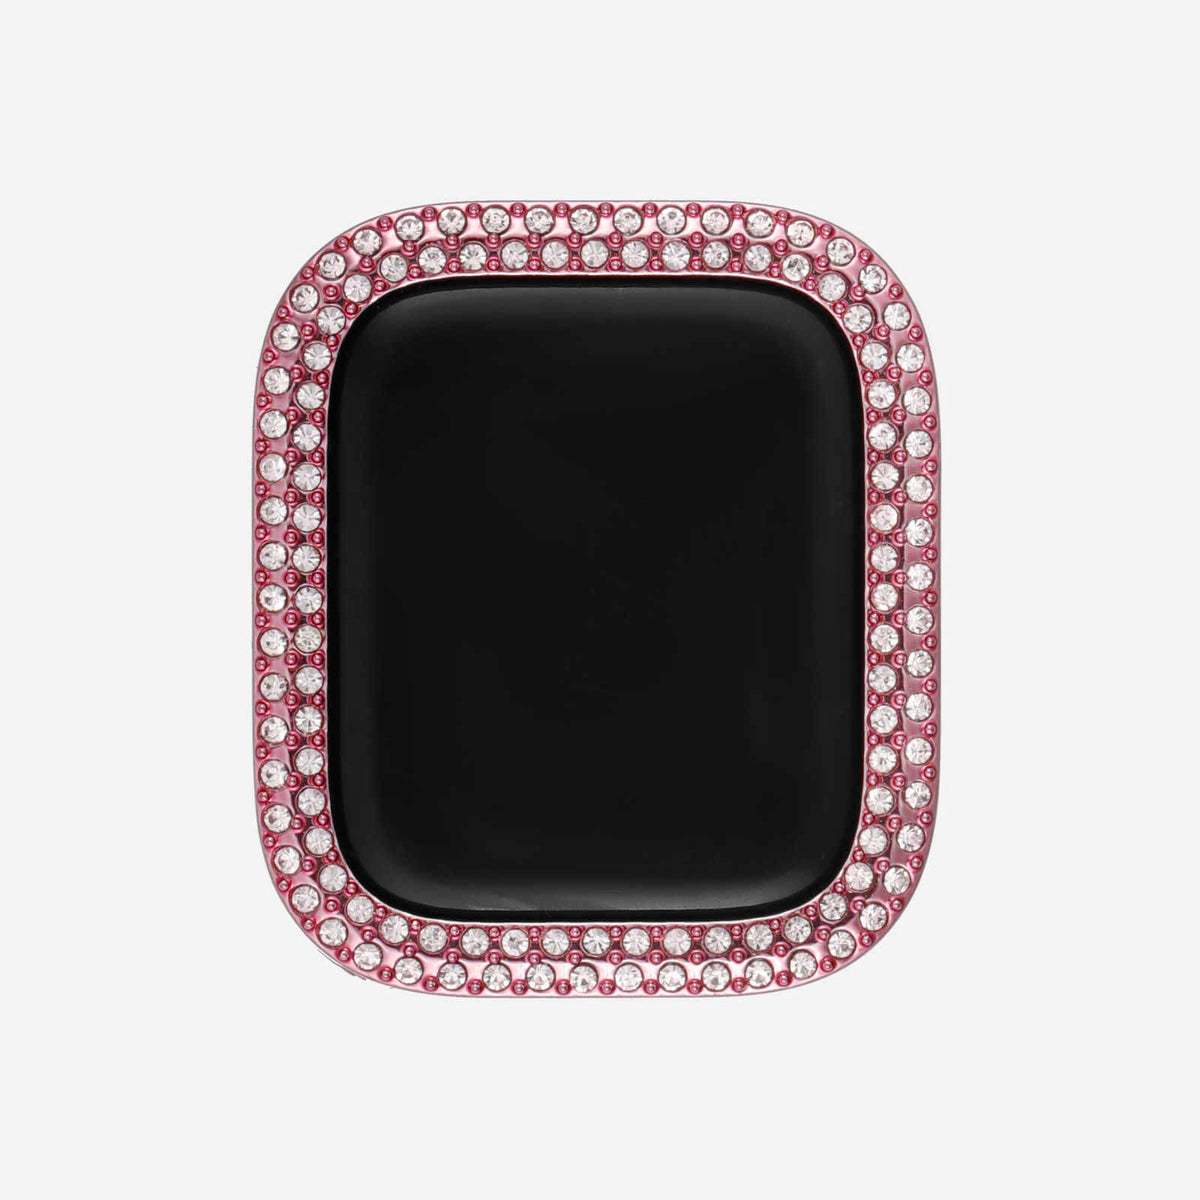 Apple Watch Double Halo Crystal Bumper Case - Rose Gold